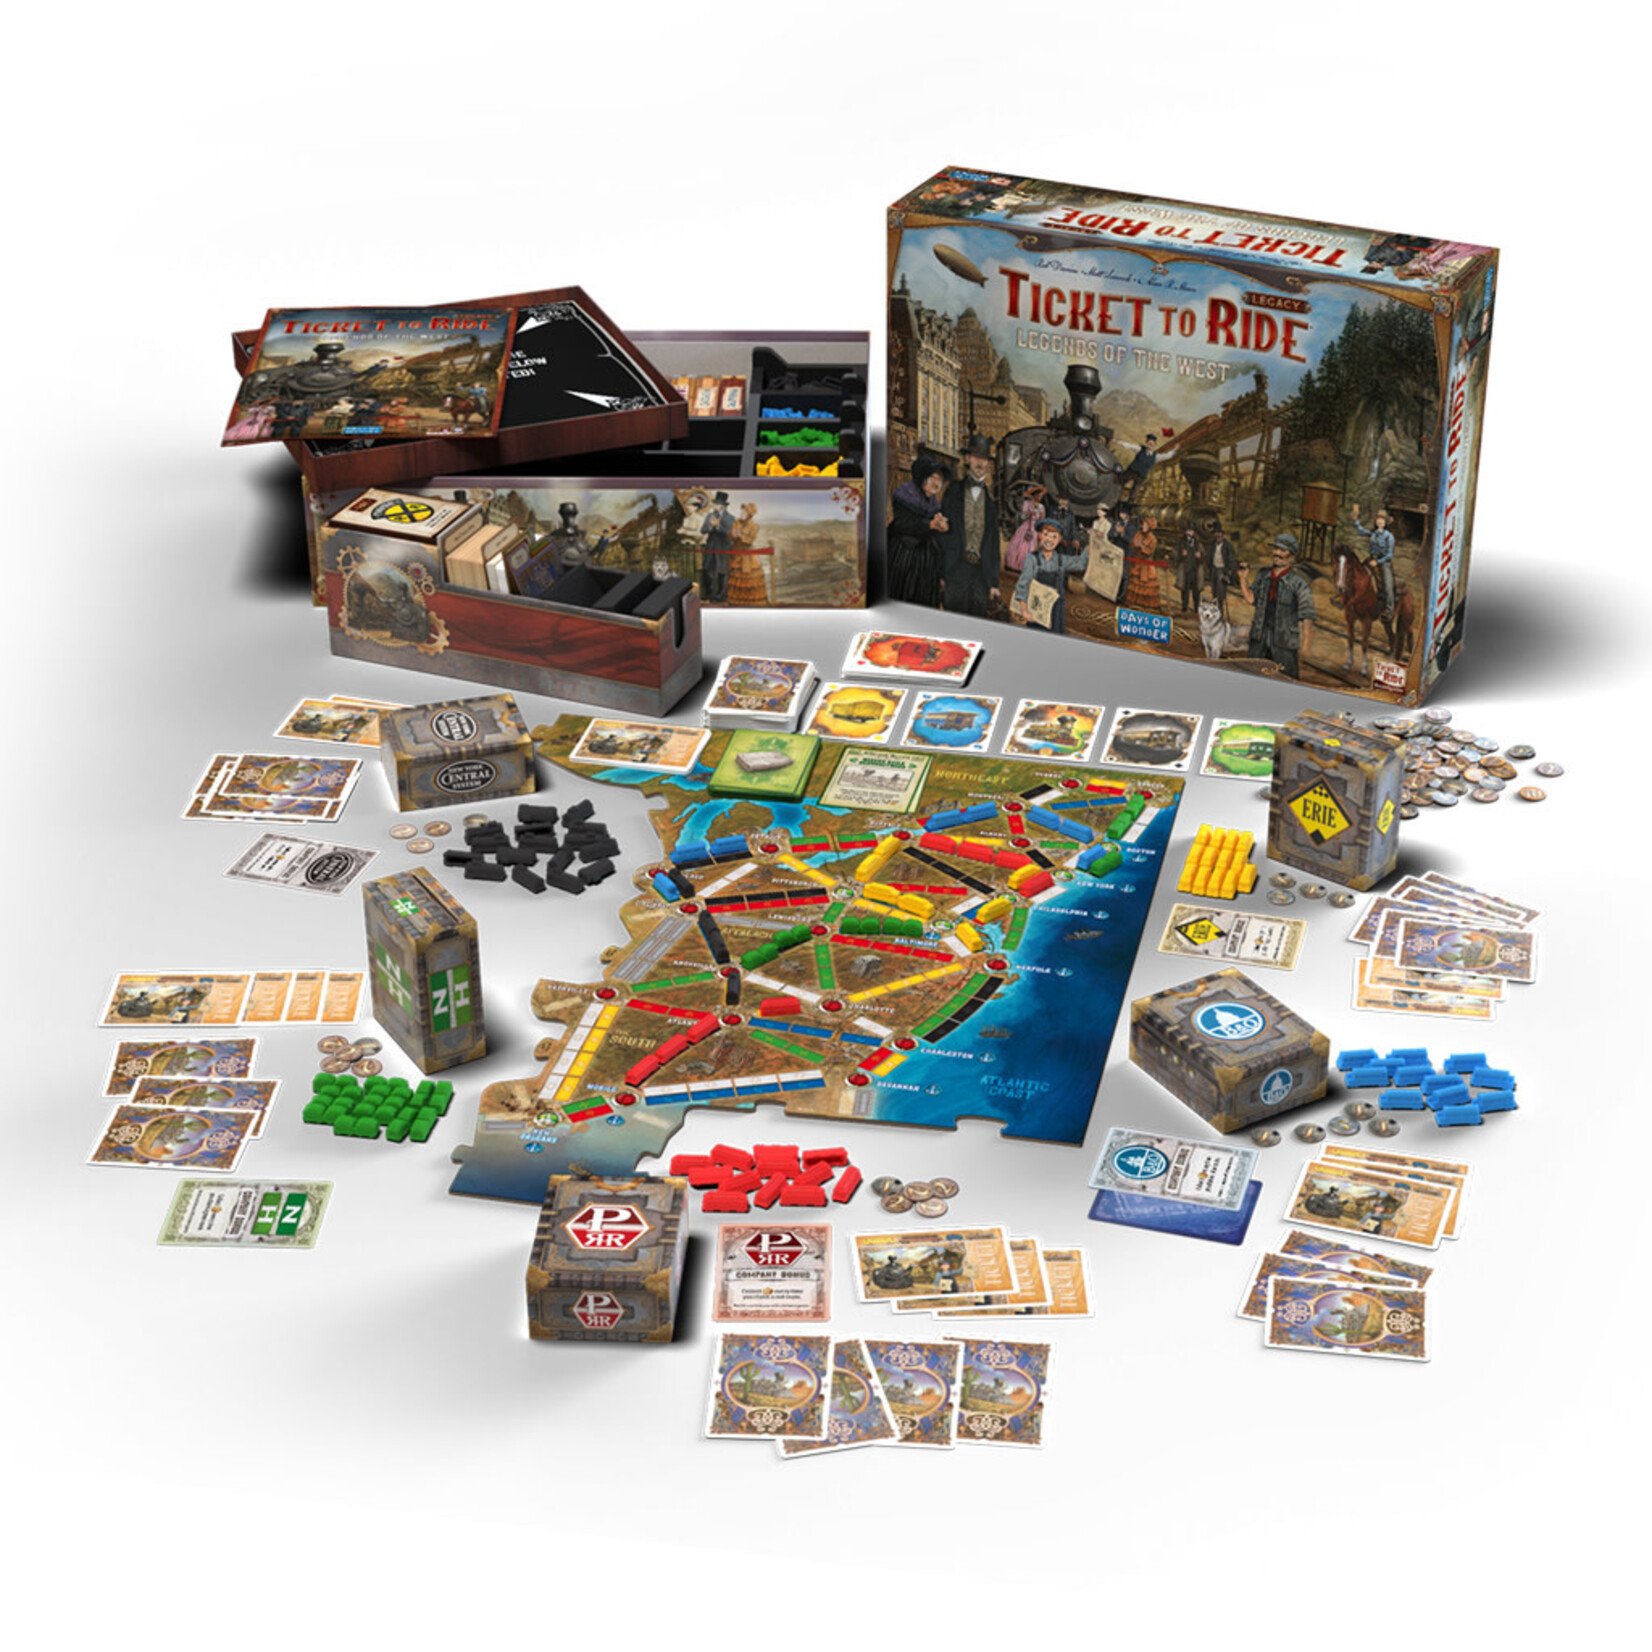 In Ticket to Ride Legacy: Legends of the West